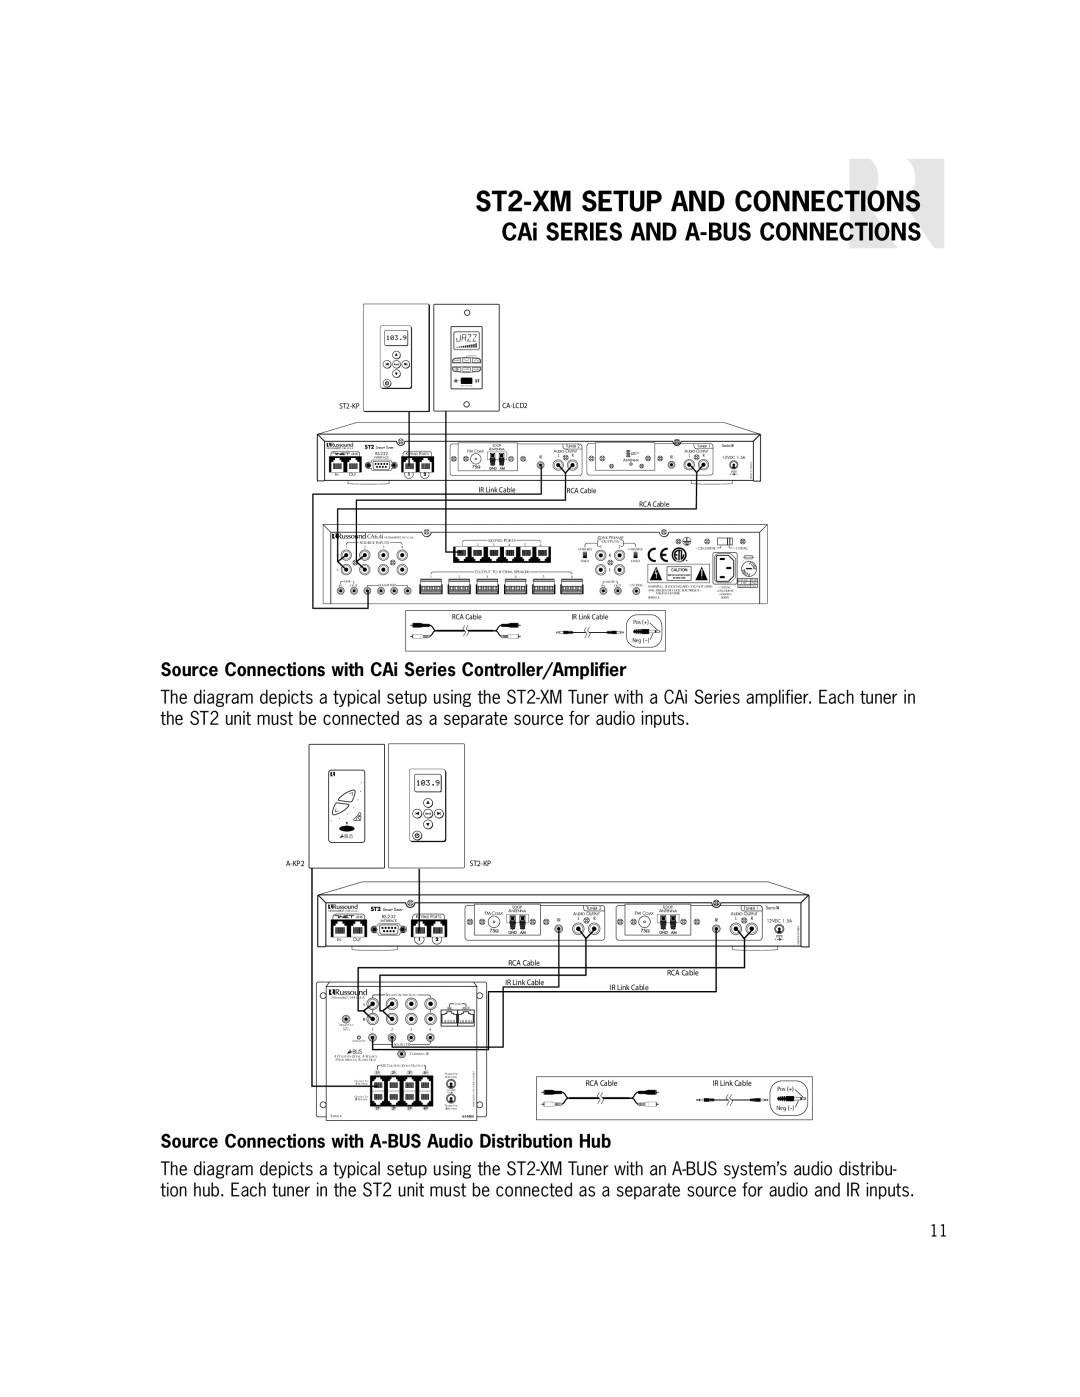 Russound manual CAi SERIES AND A-BUSCONNECTIONS, ST2-XMSETUP AND CONNECTIONS 